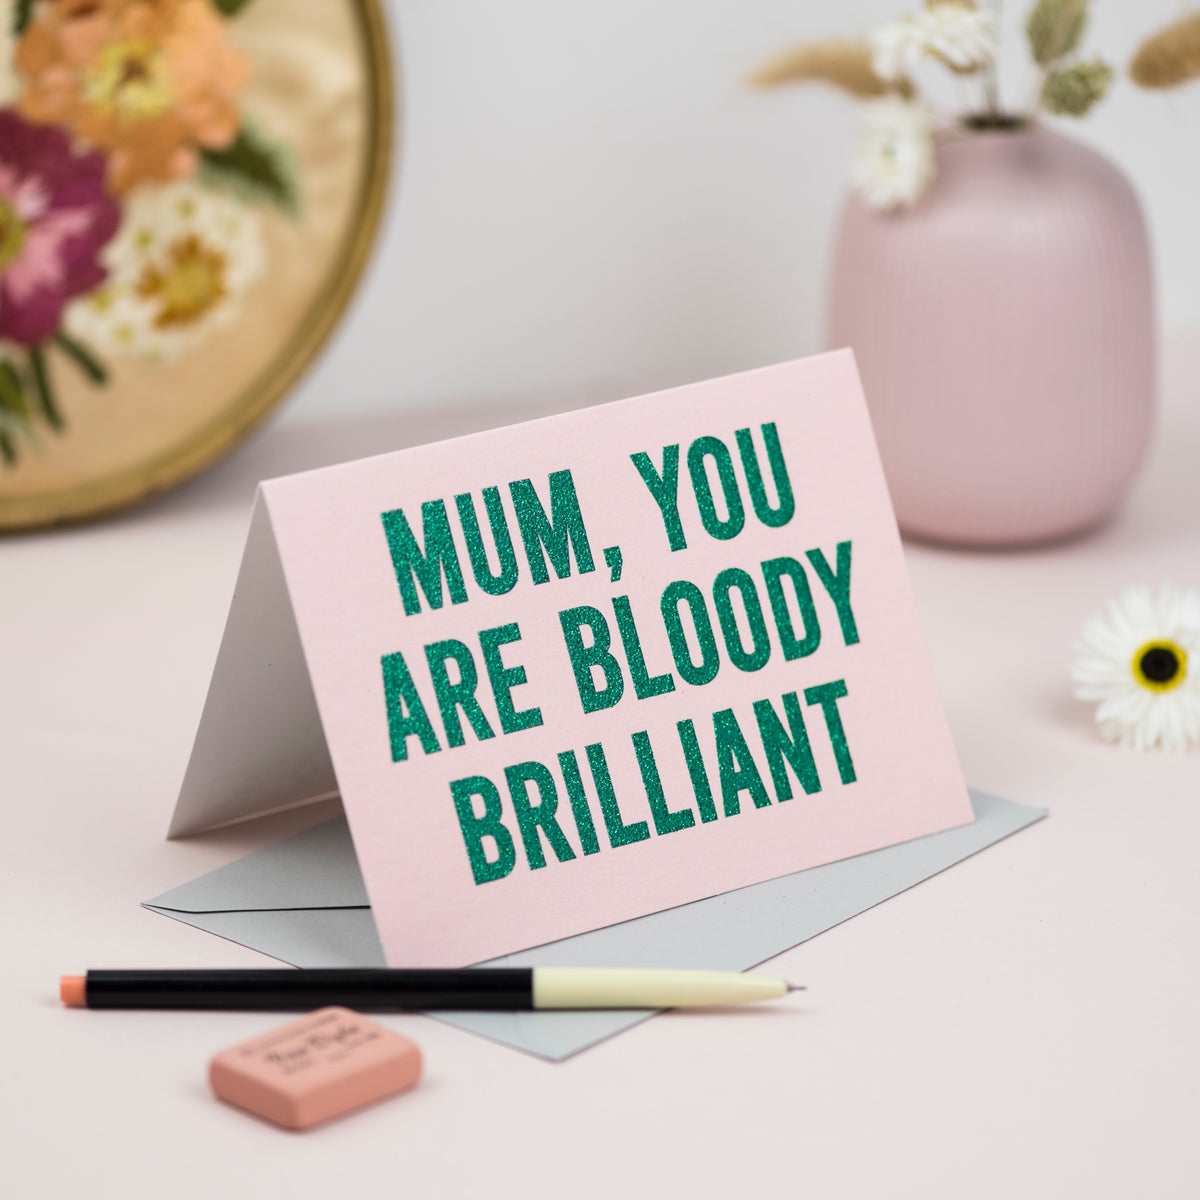 'Mum, You Are Bloody Brilliant' Greetings Card - Biodegradable Glitter